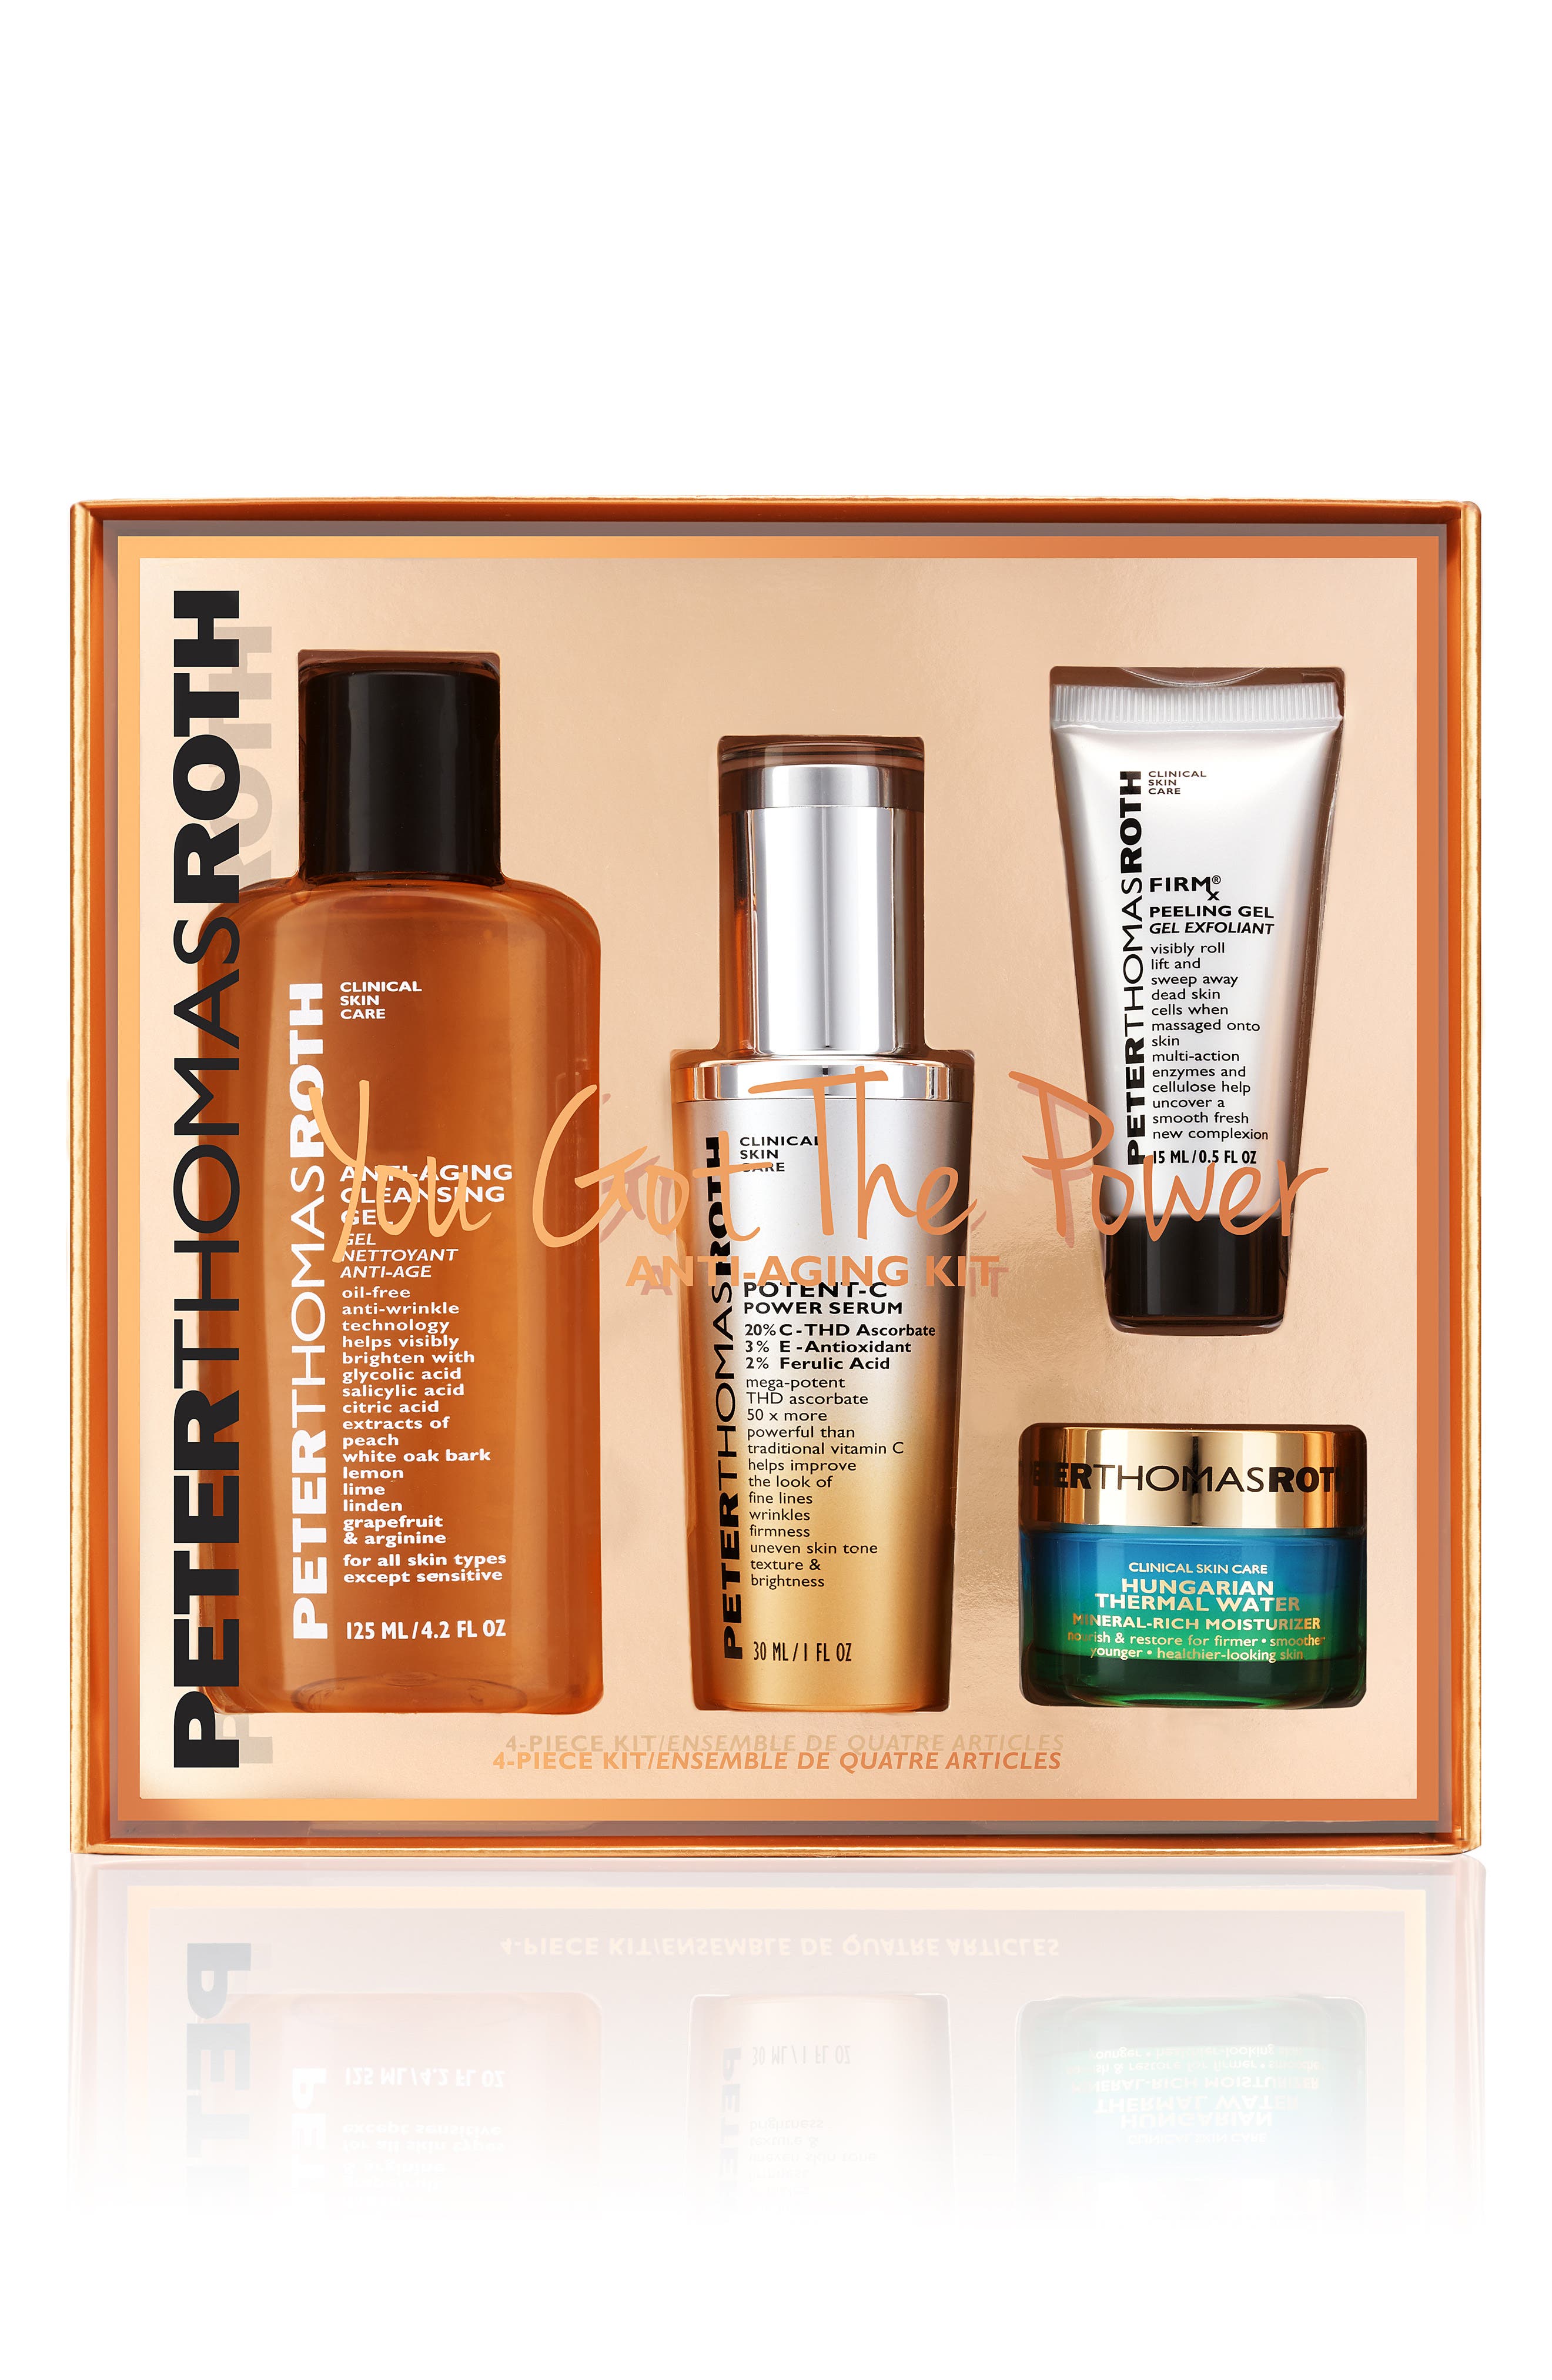 Peter Thomas Roth YOU GOT THE POWER ANTI-AGING SET